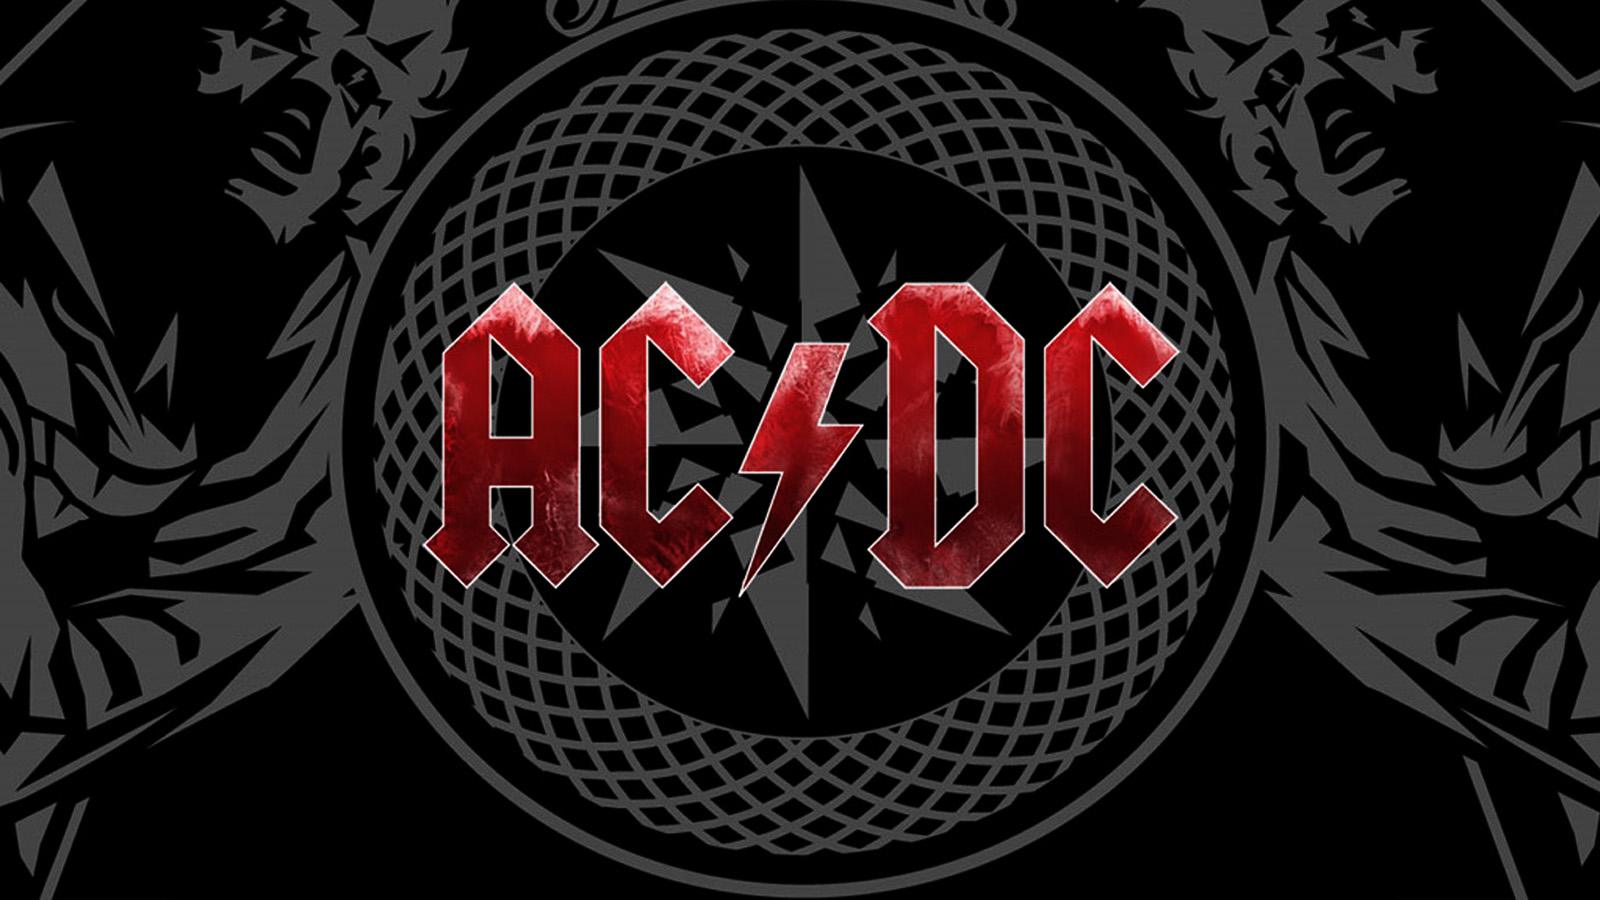 Central Wallpaper Ac Dc Music Band HD Album Covers